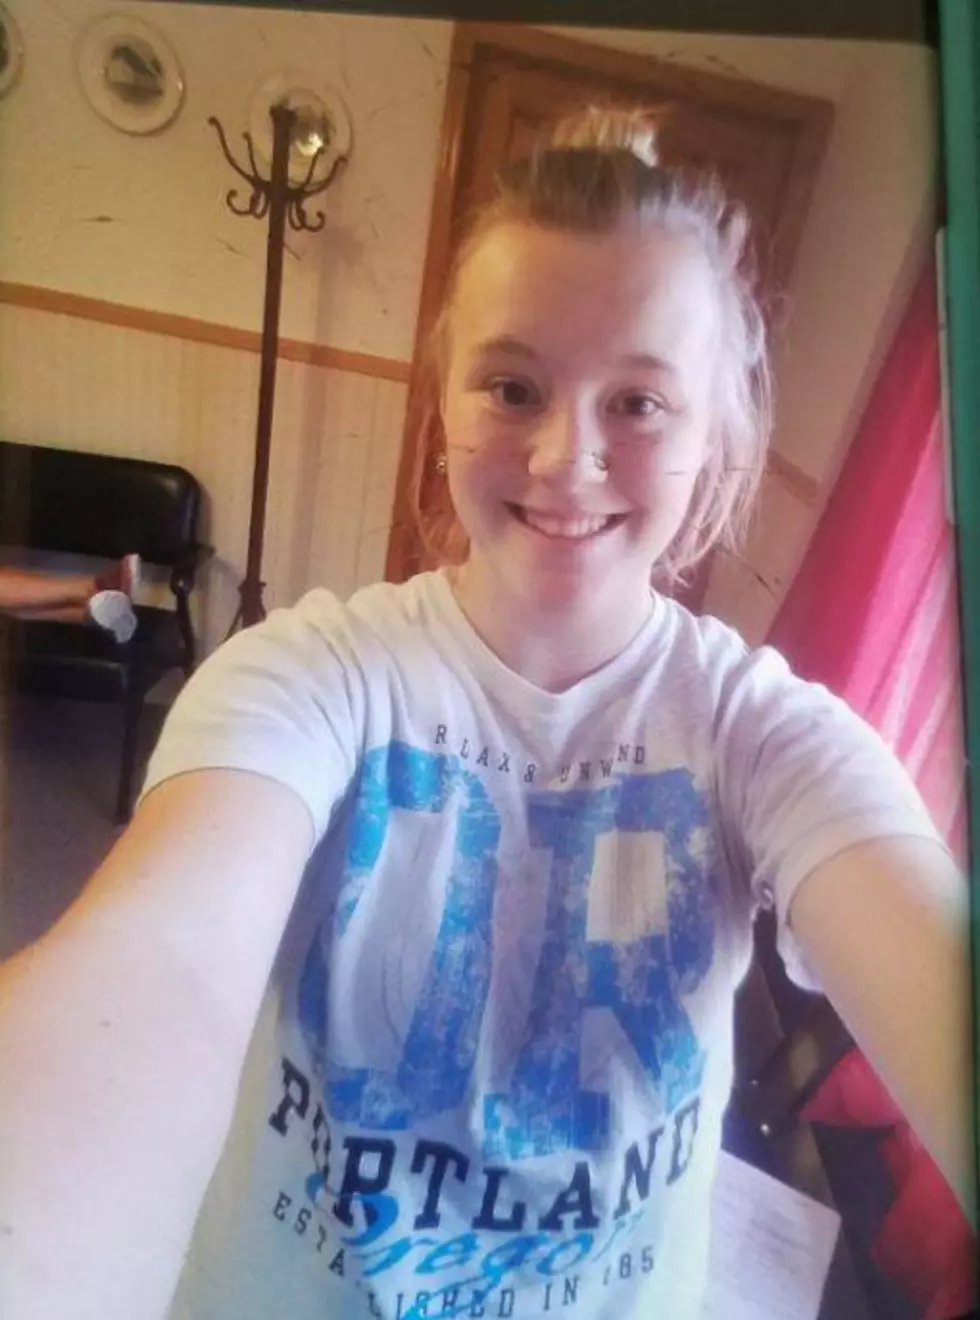 Missing Monroe County Teen Found Safe